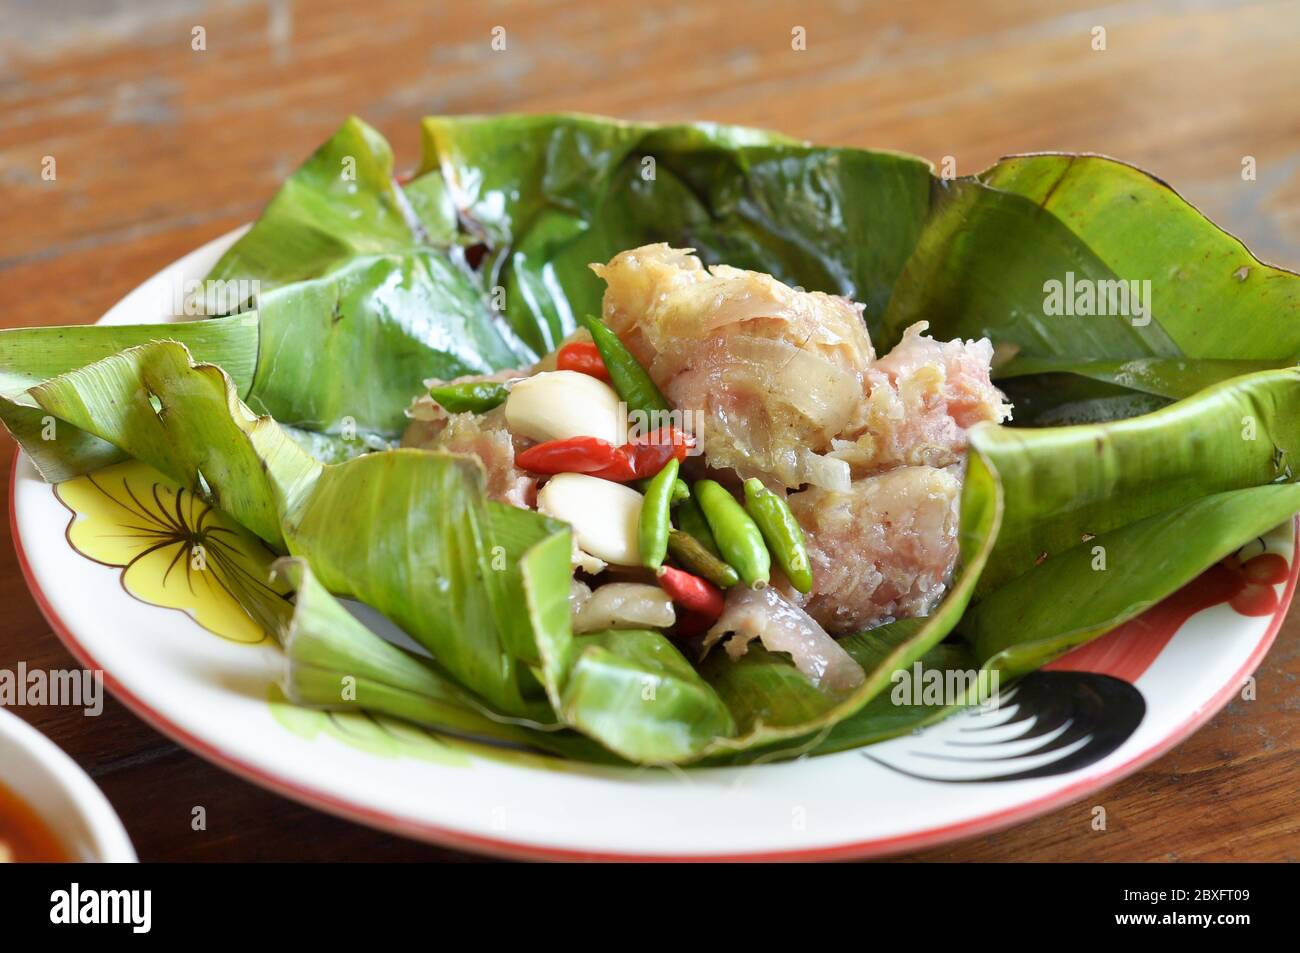 Sour pork or Nham is a popular native foods commonly consumed in the local the north of Thailand. Stock Photo